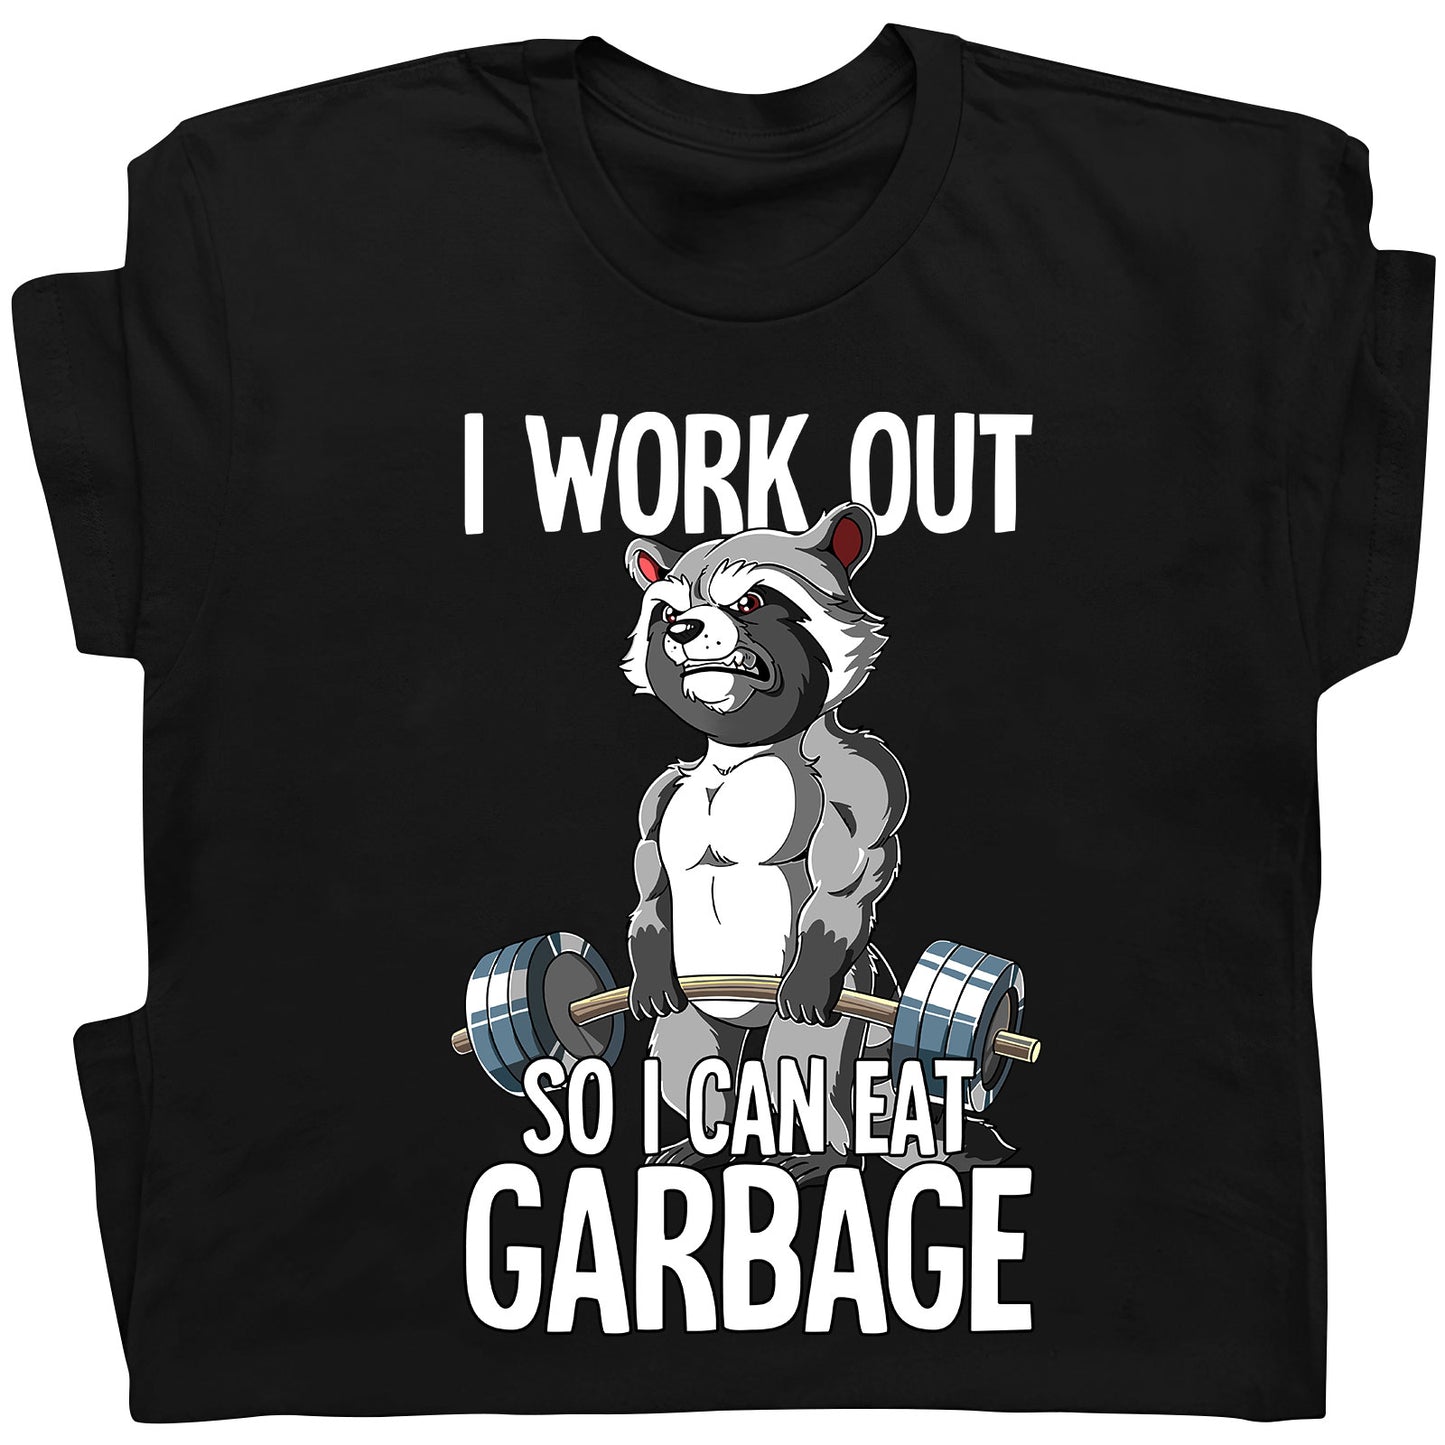 Workout - I Workout So I Can Eat Garbage - Personalized Shirt